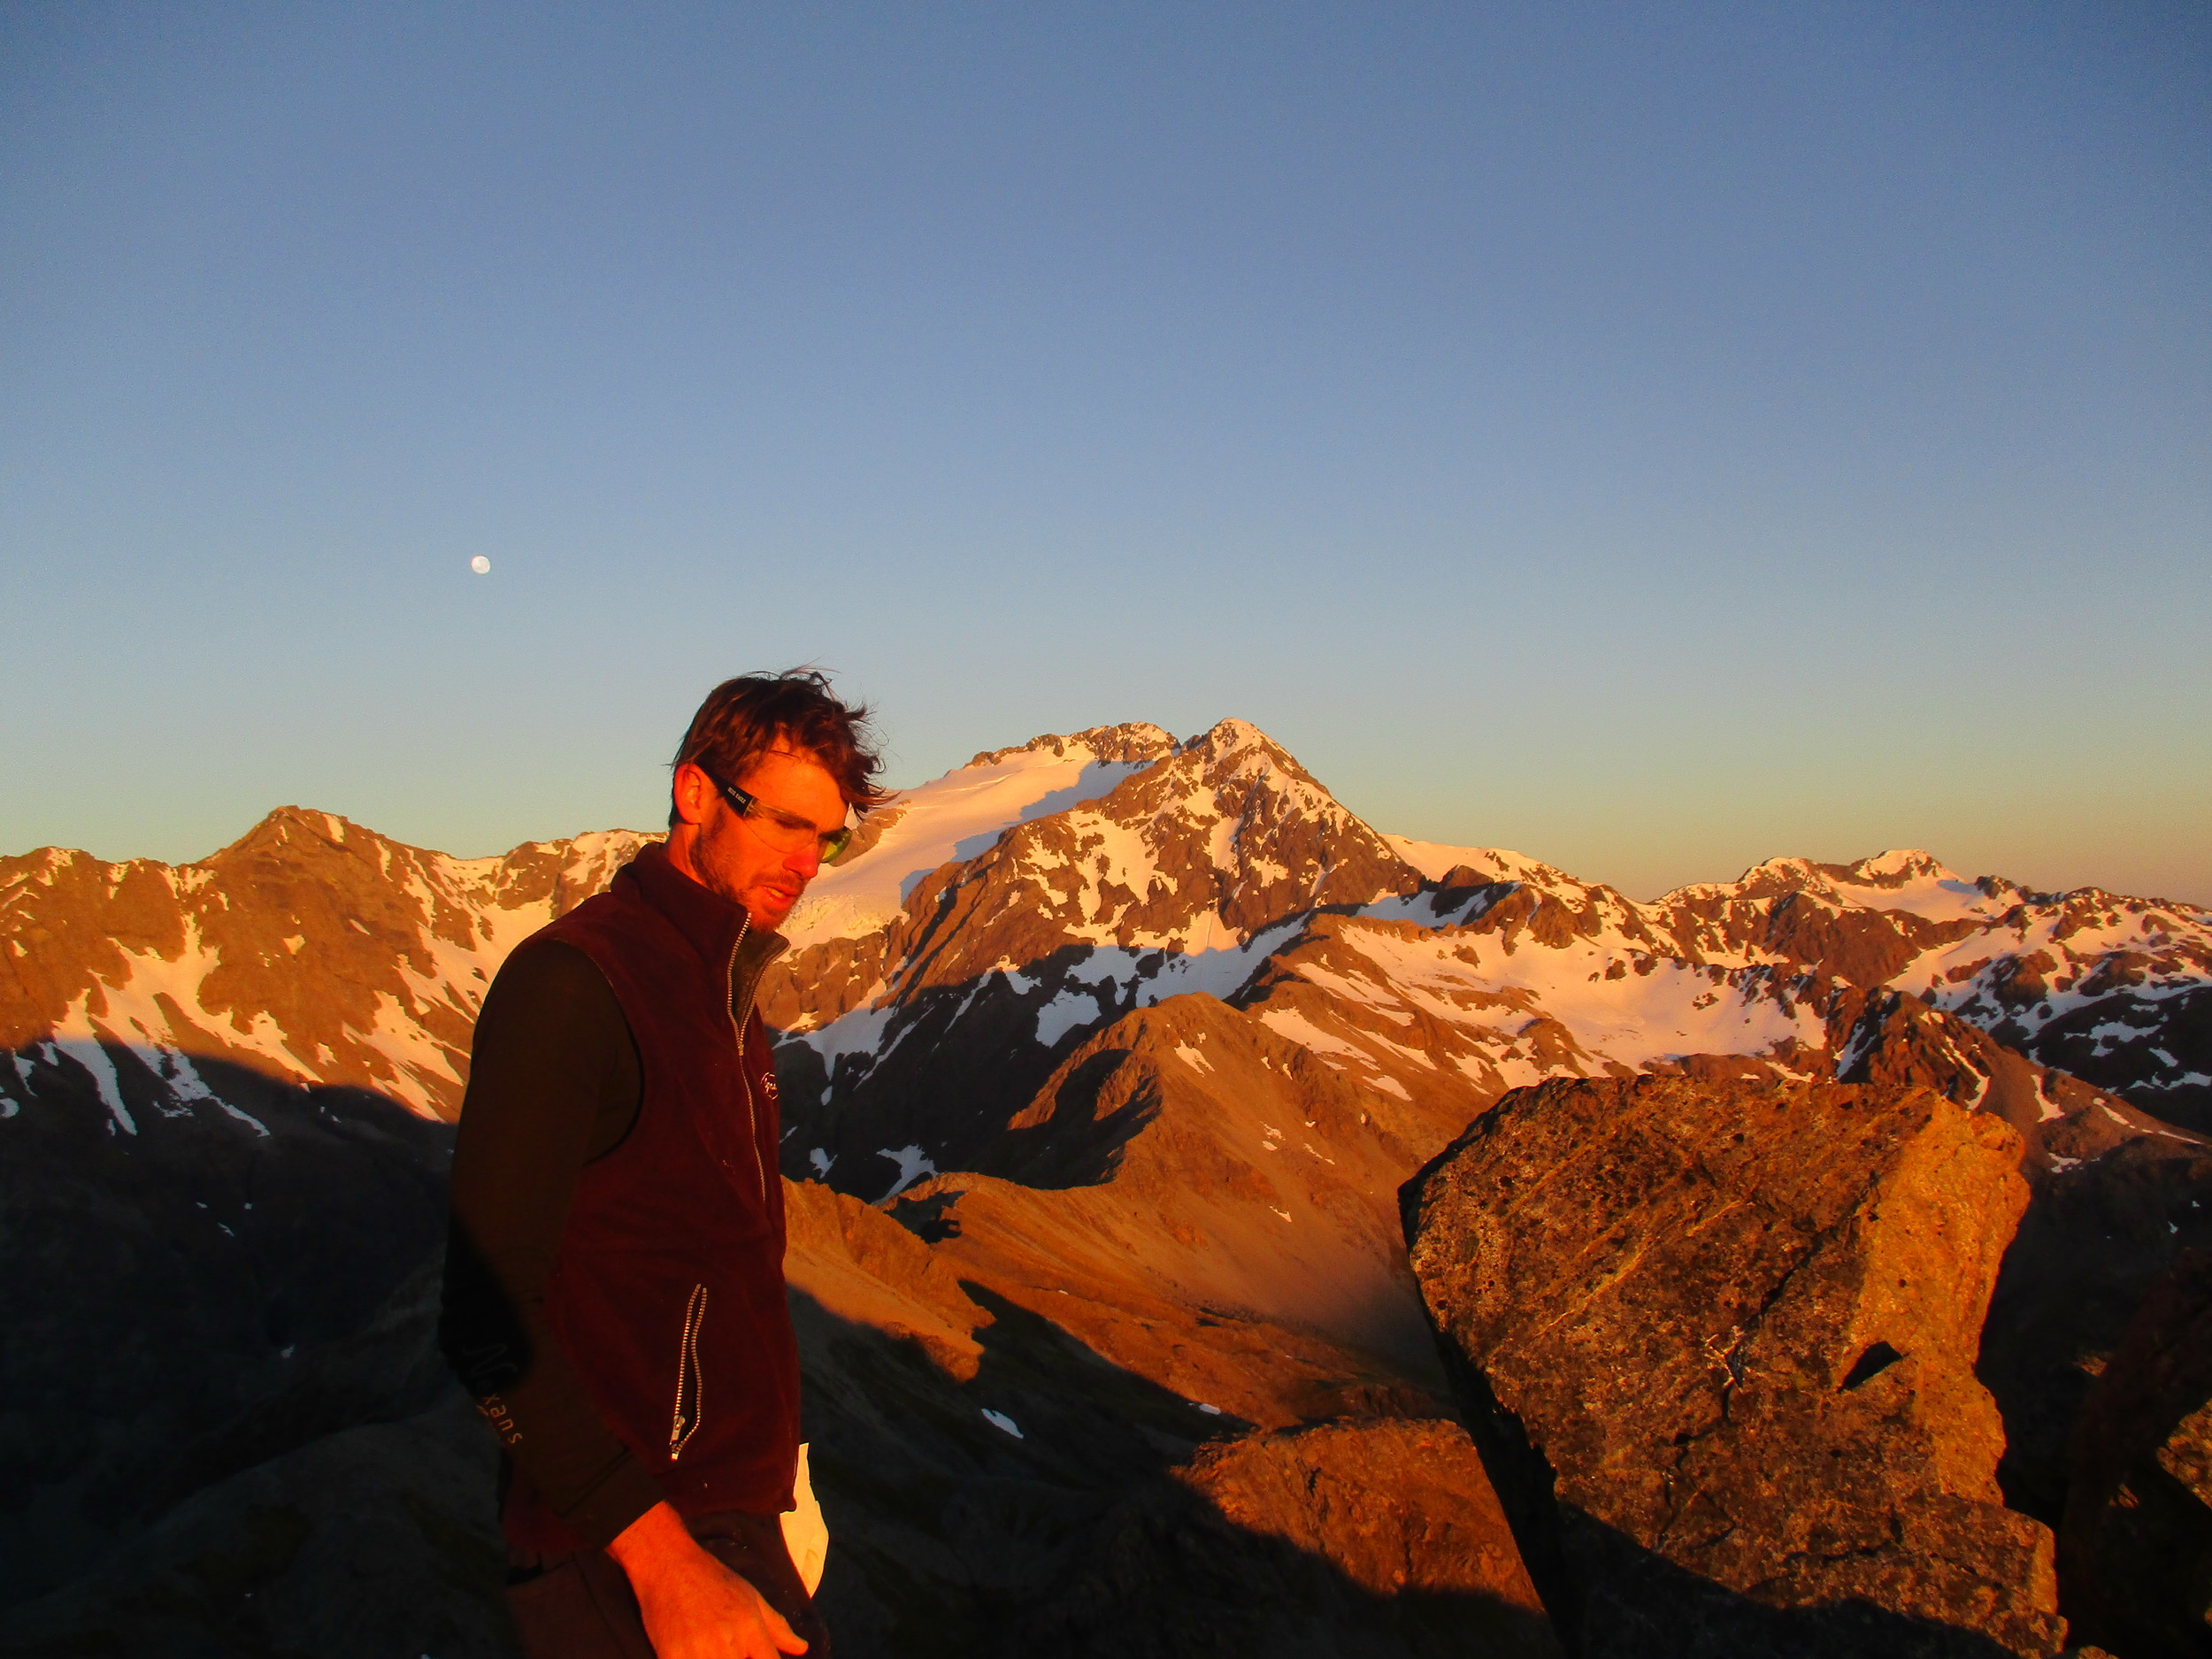   Dawn on Avalanche peak, Carl waking up from our bivvy with Mount Rolleston 2275m behind  